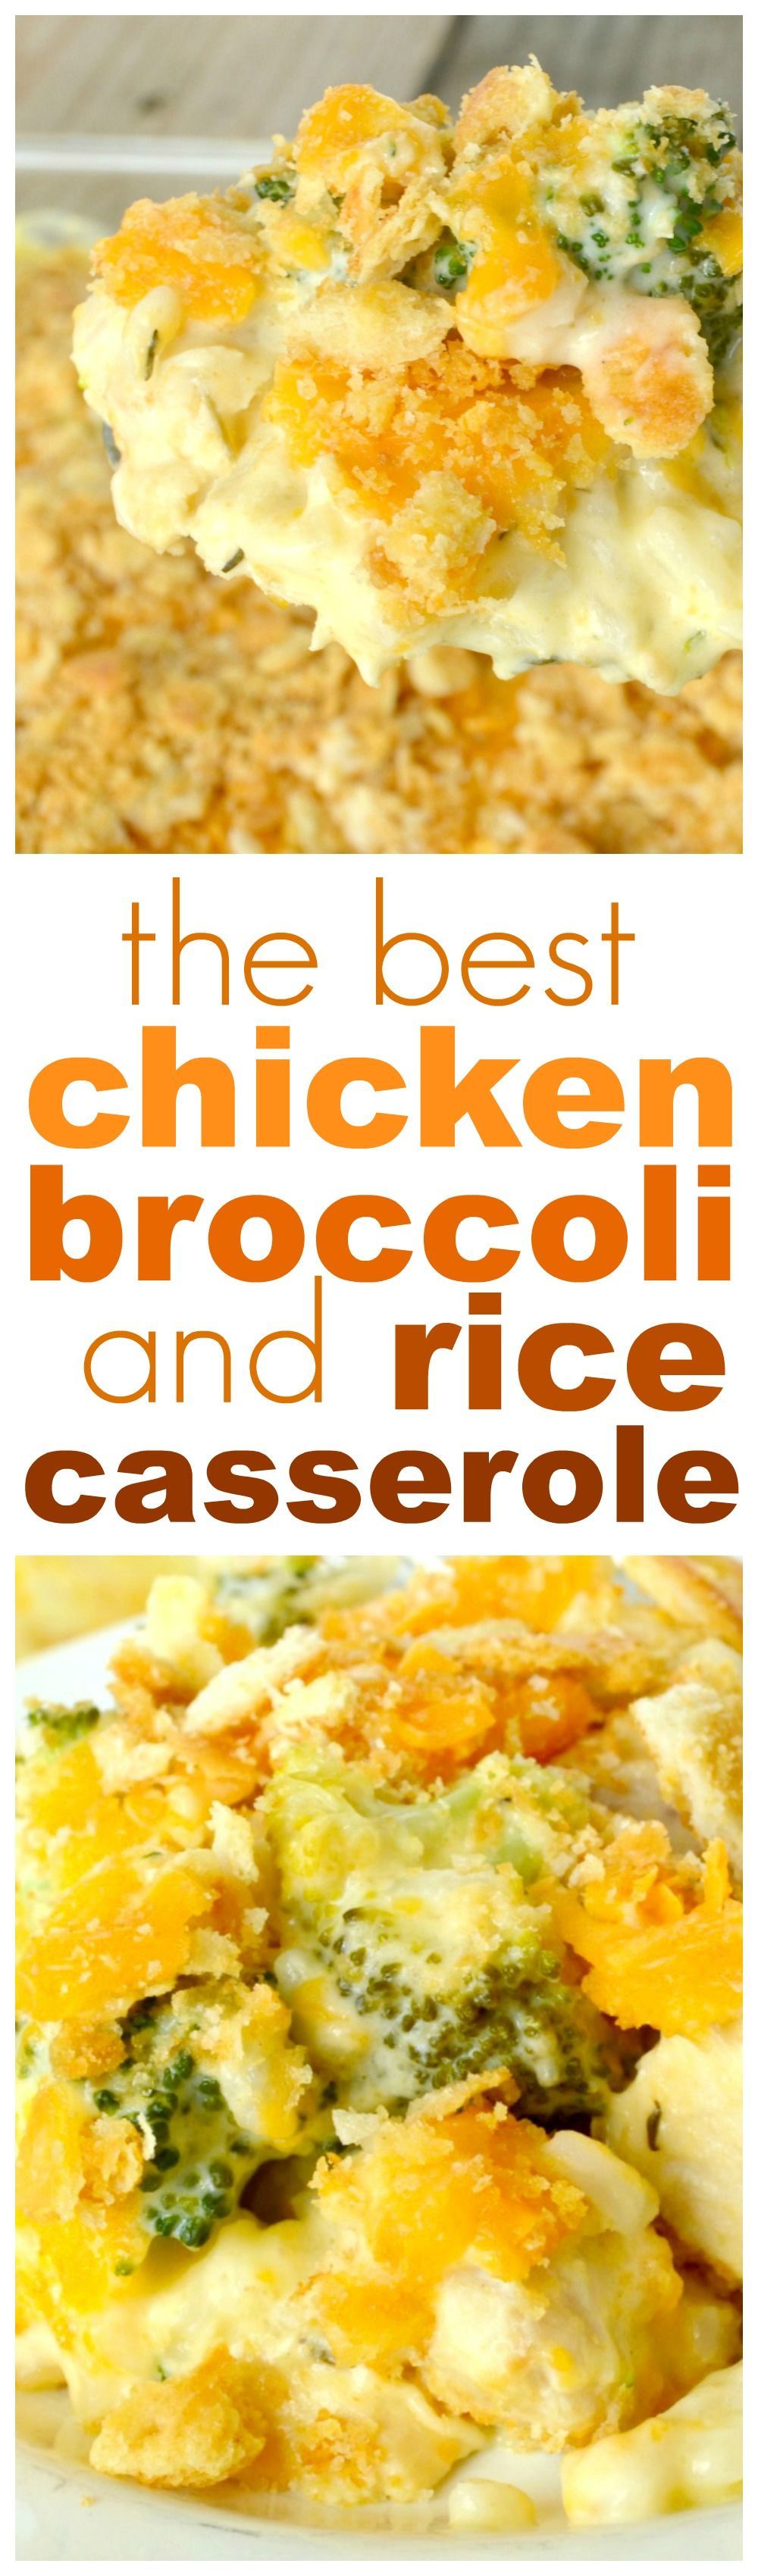 Chicken Broccoli and Rice Casserole. This amazing casserole is loaded with chunks of chicken breasts, fres